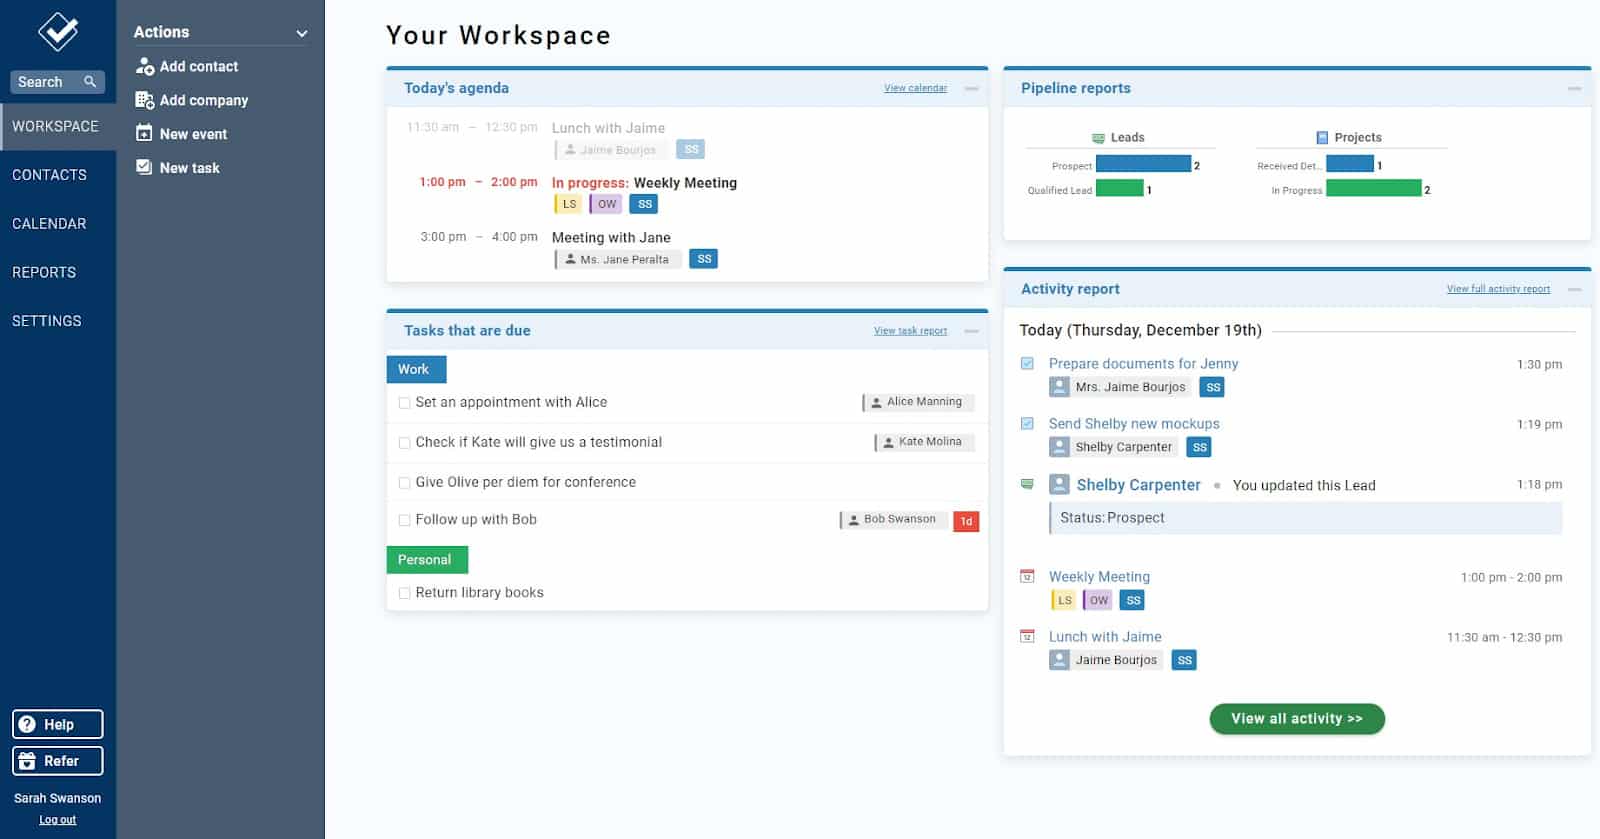 Image of Less Annoying CRM’s home page where you can view your workspace.